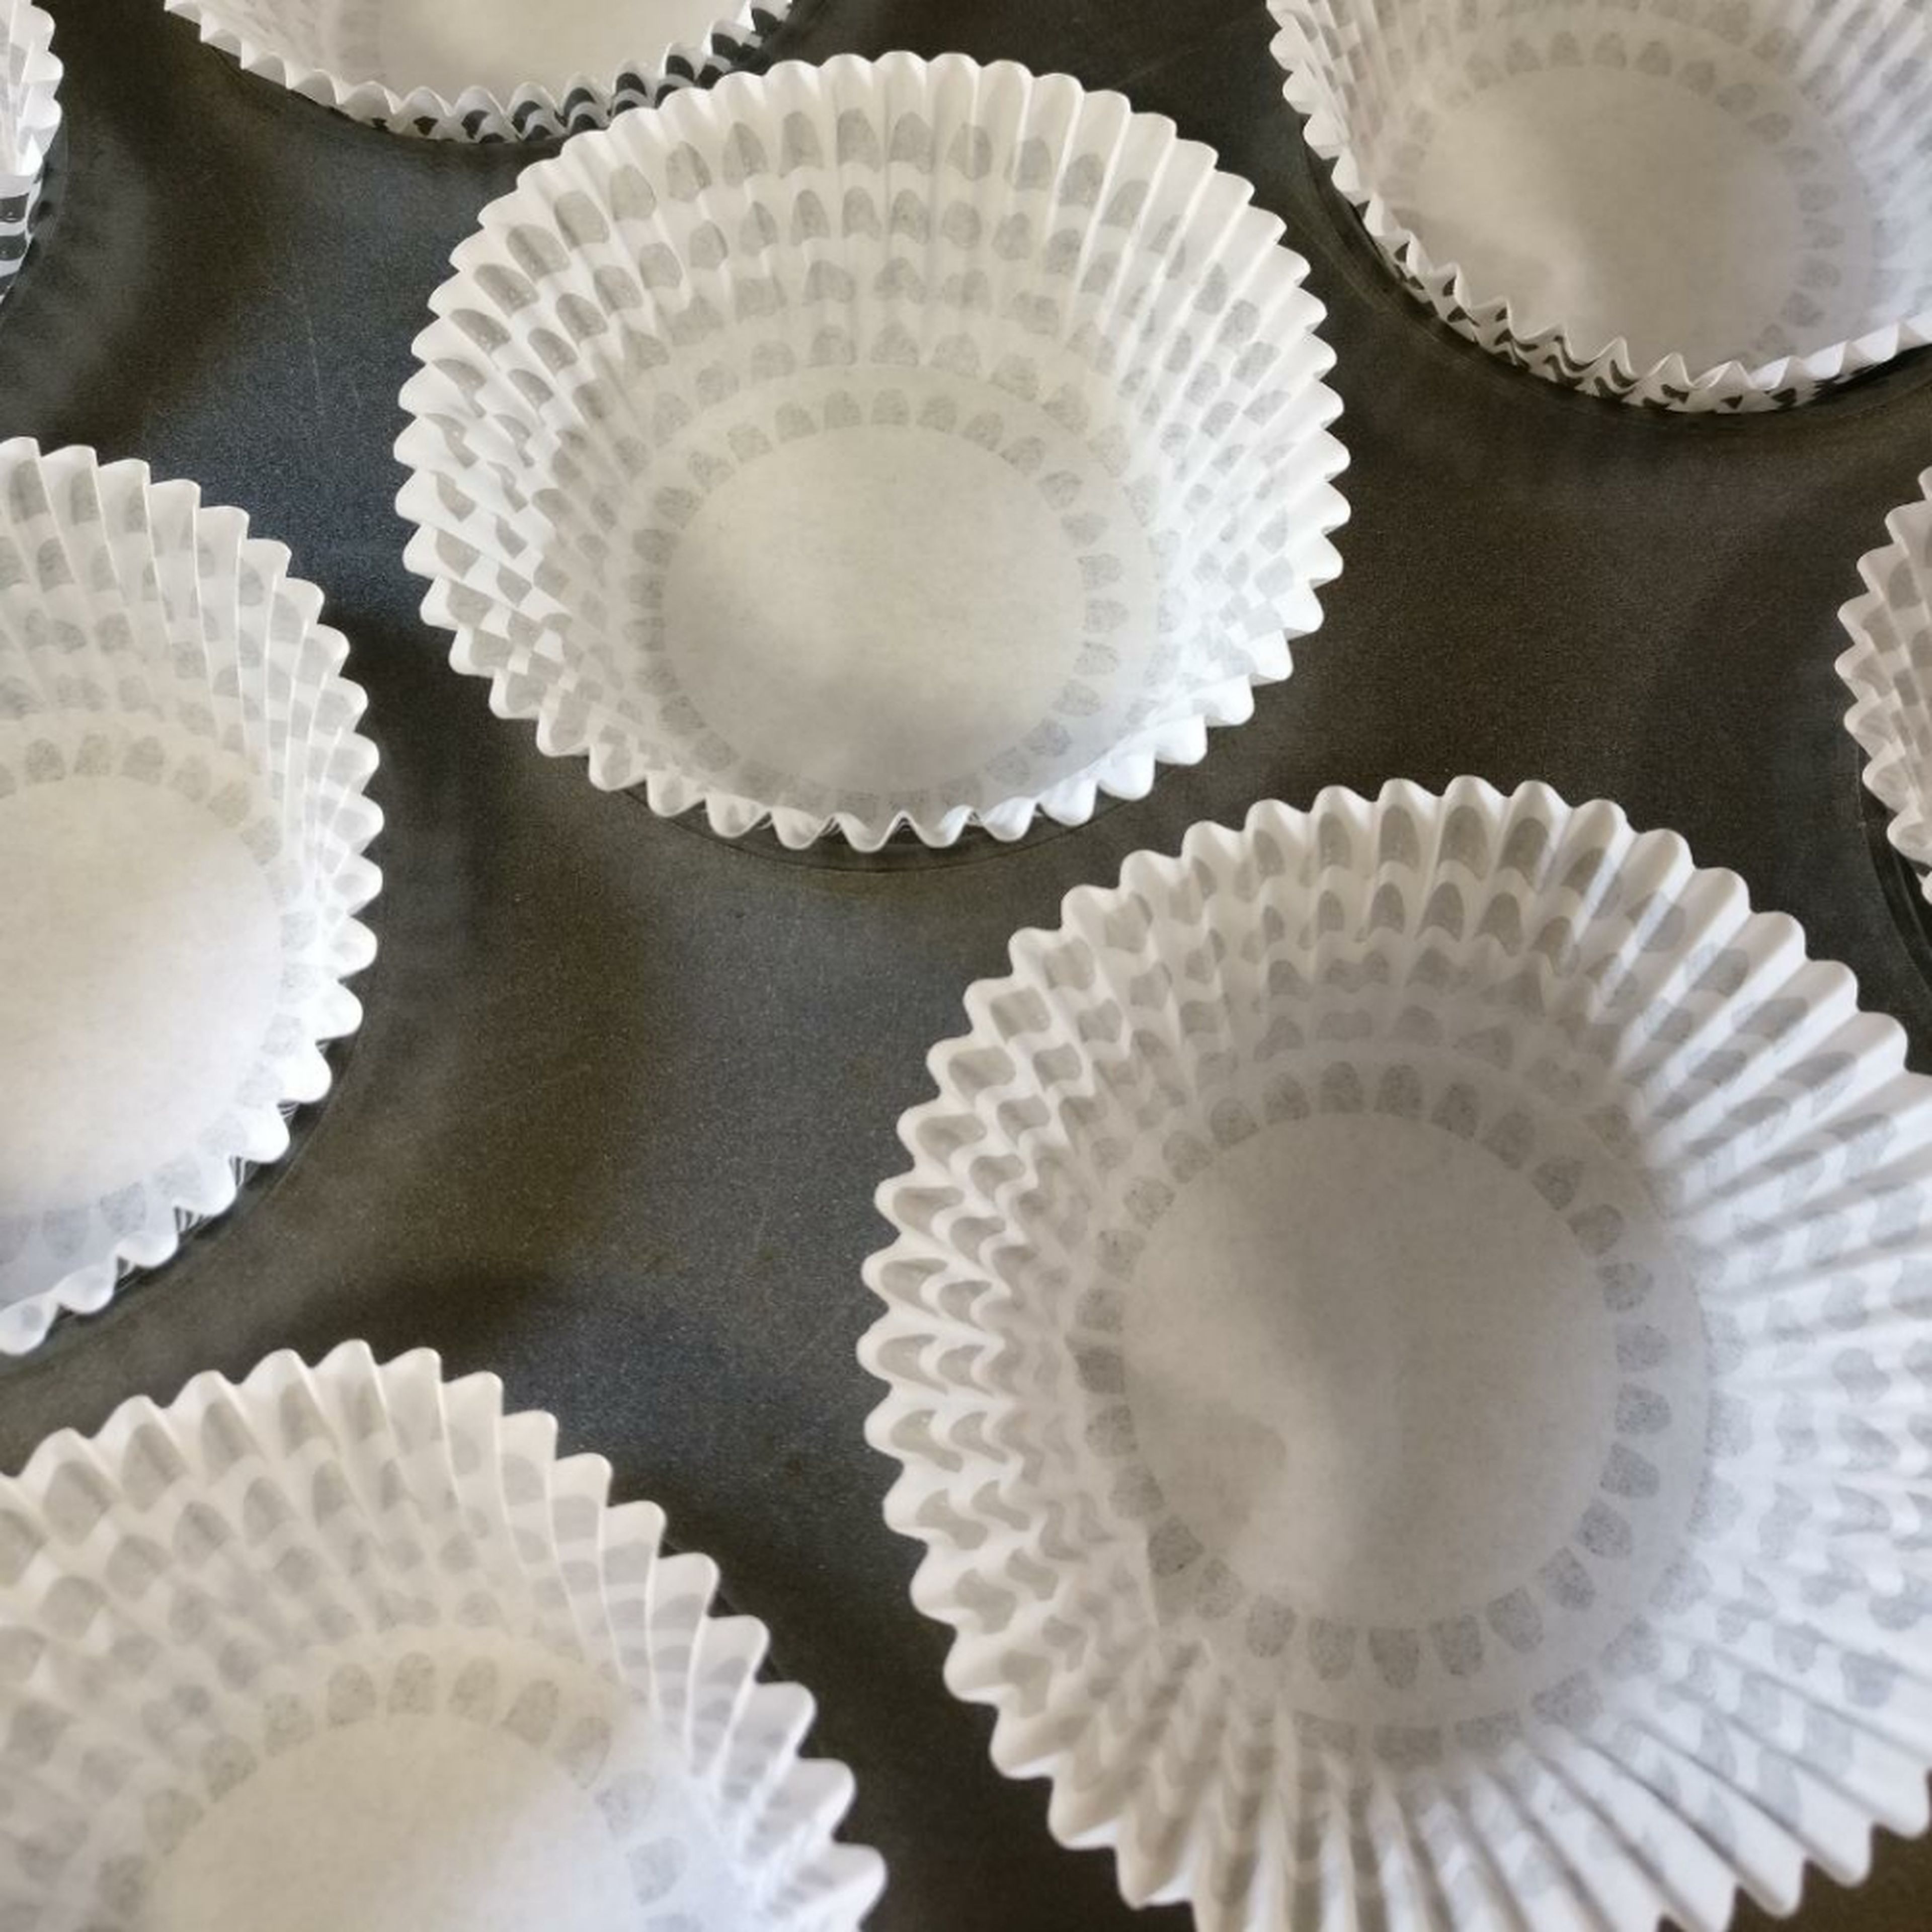 Preheat oven to 190°C and line a muffin tin with cupcake/ muffin cases.